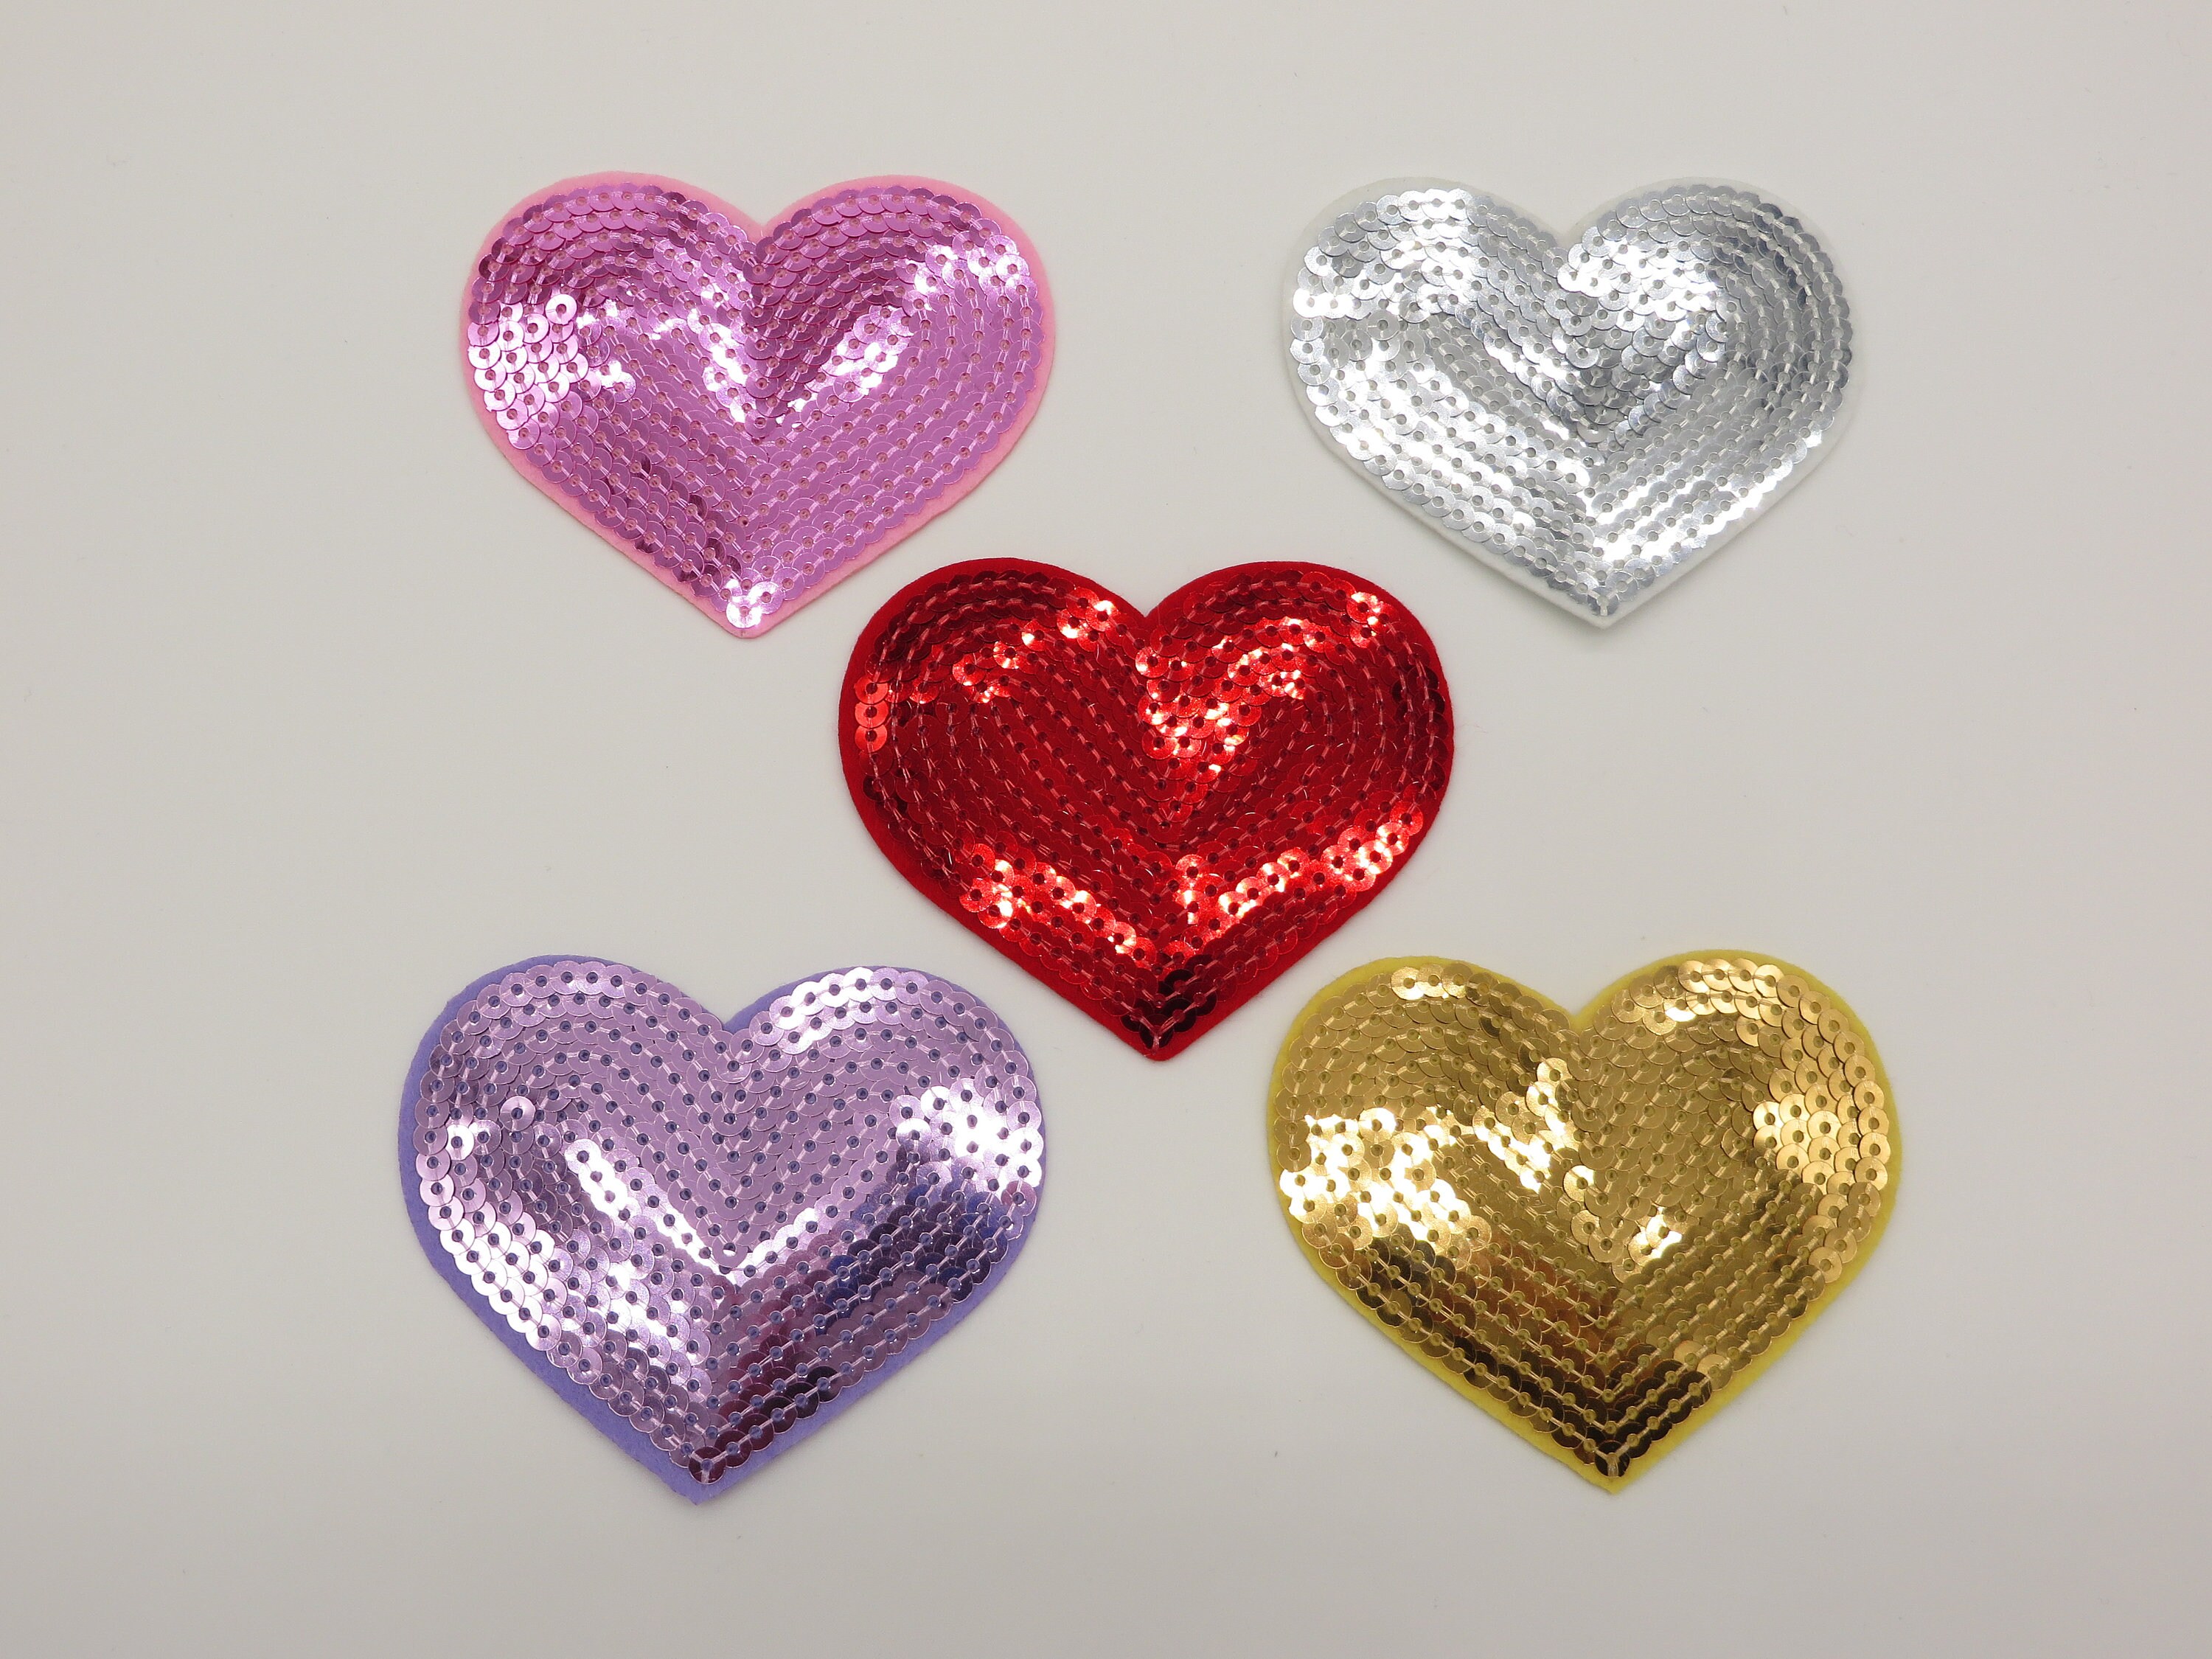 SEQUIN HEART IRON ON BADGE SEW ON PATCH SILVER EMBROIDERED APPLIQUE 